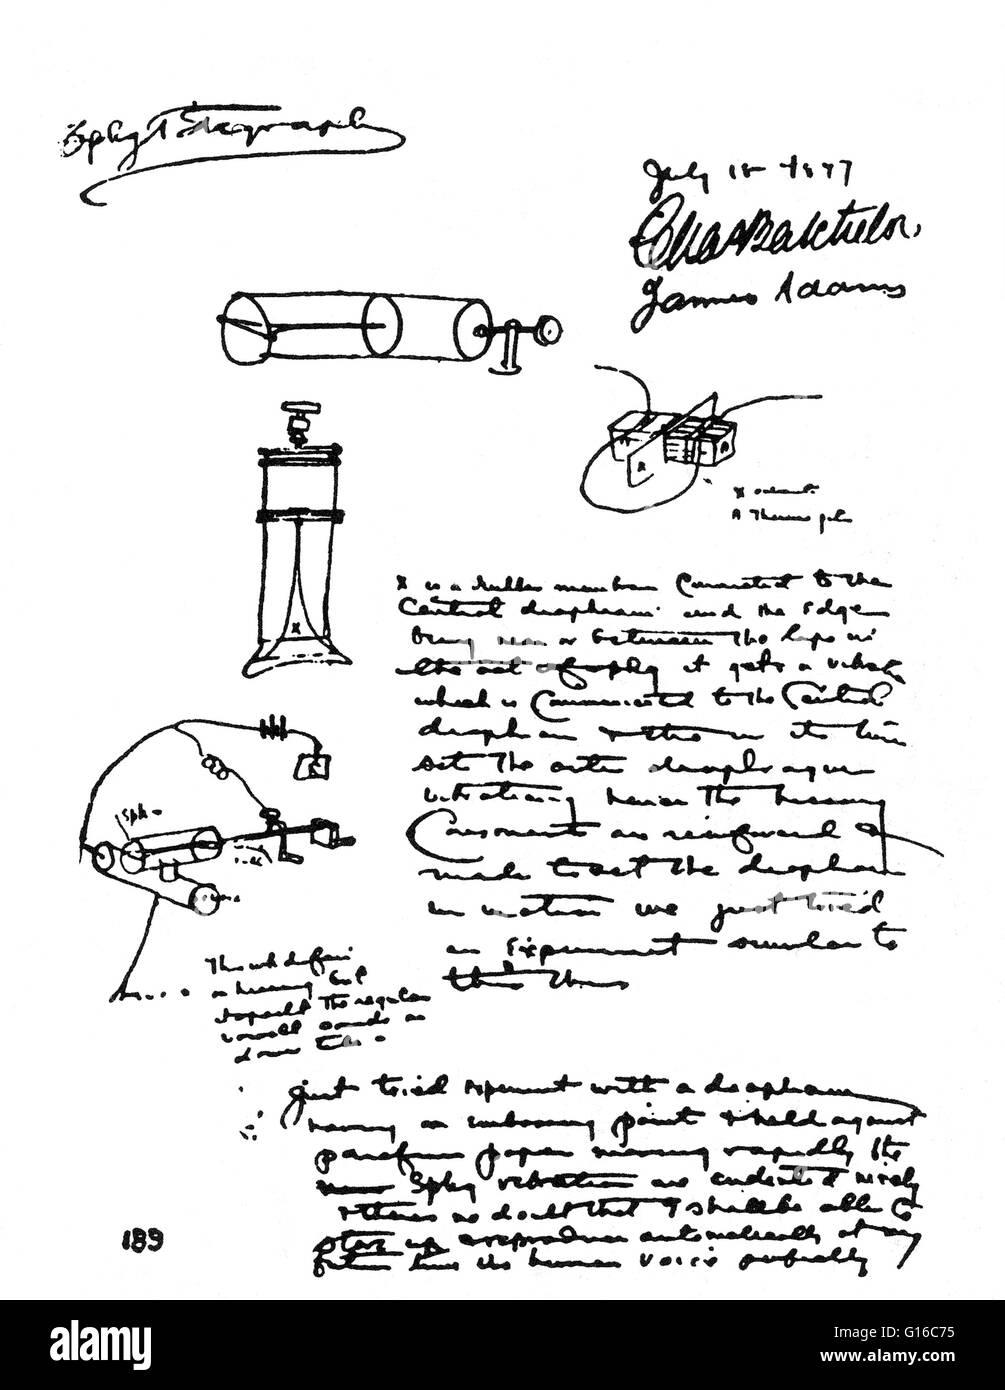 Reproduction of page from Edison's notebook in which he recorded his first conception of the phonograph. The phonograph was invented in 1877 by Thomas Edison. While other inventors had produced devices that could record sounds, Edison's phonograph was the Stock Photo